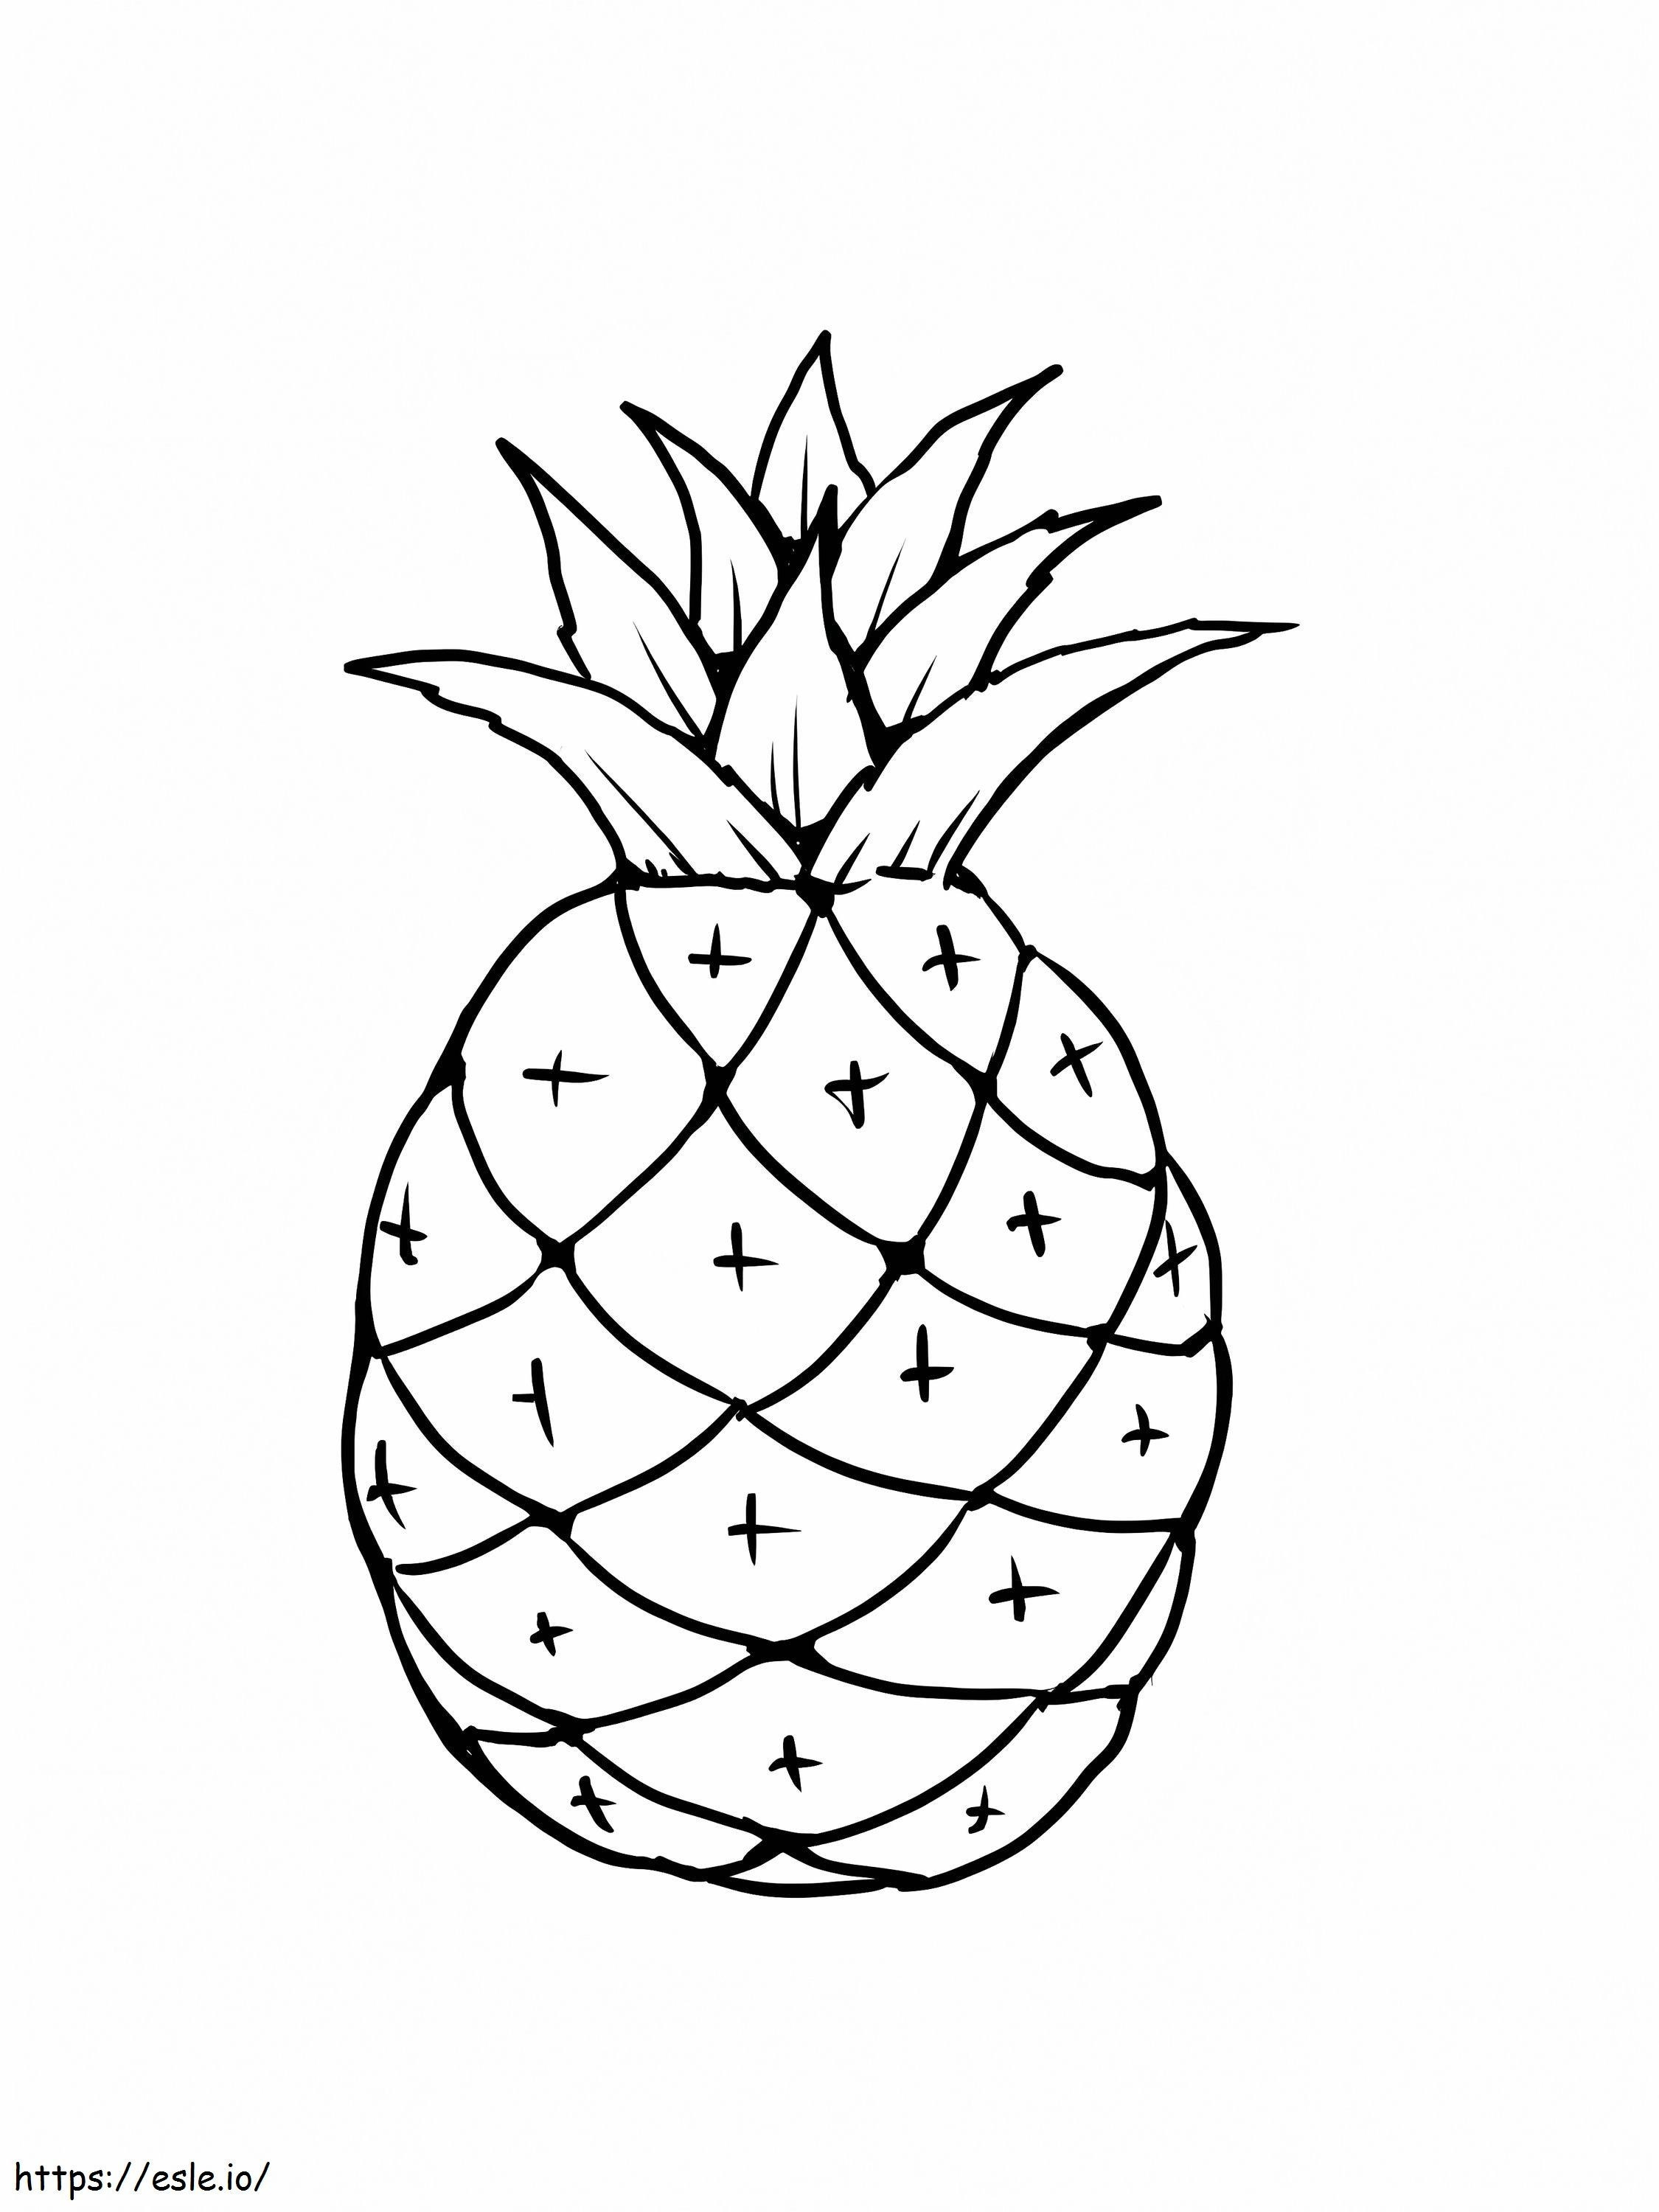 Basic Pineapple coloring page